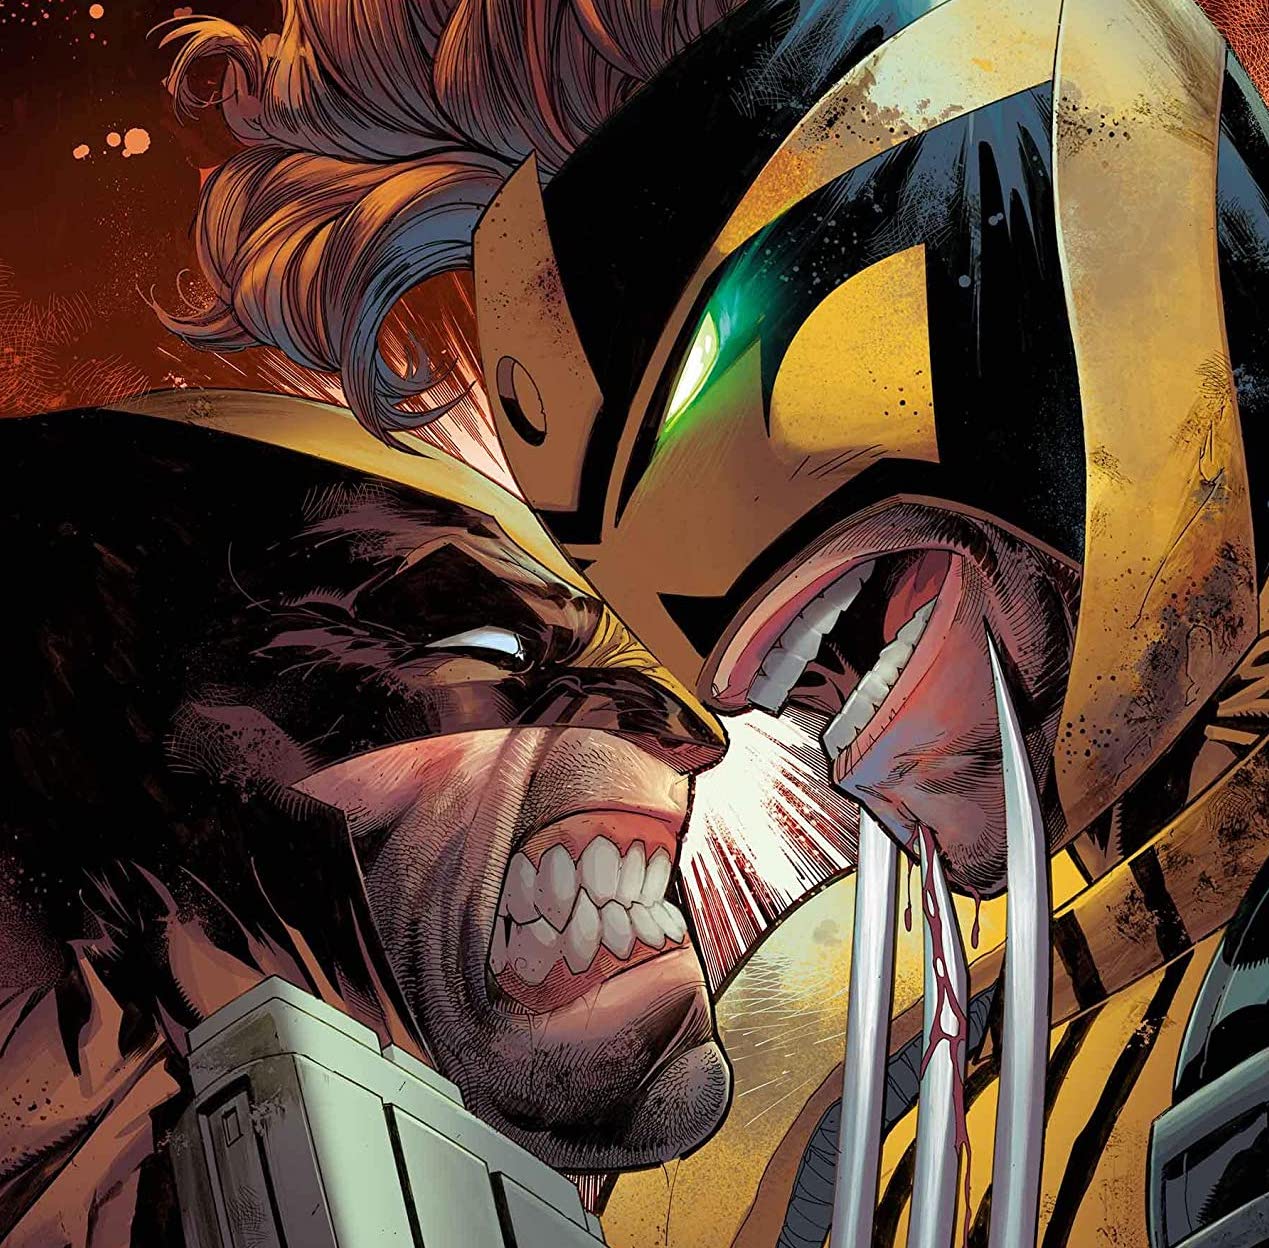 EXCLUSIVE Marvel Preview: Wolverine #8